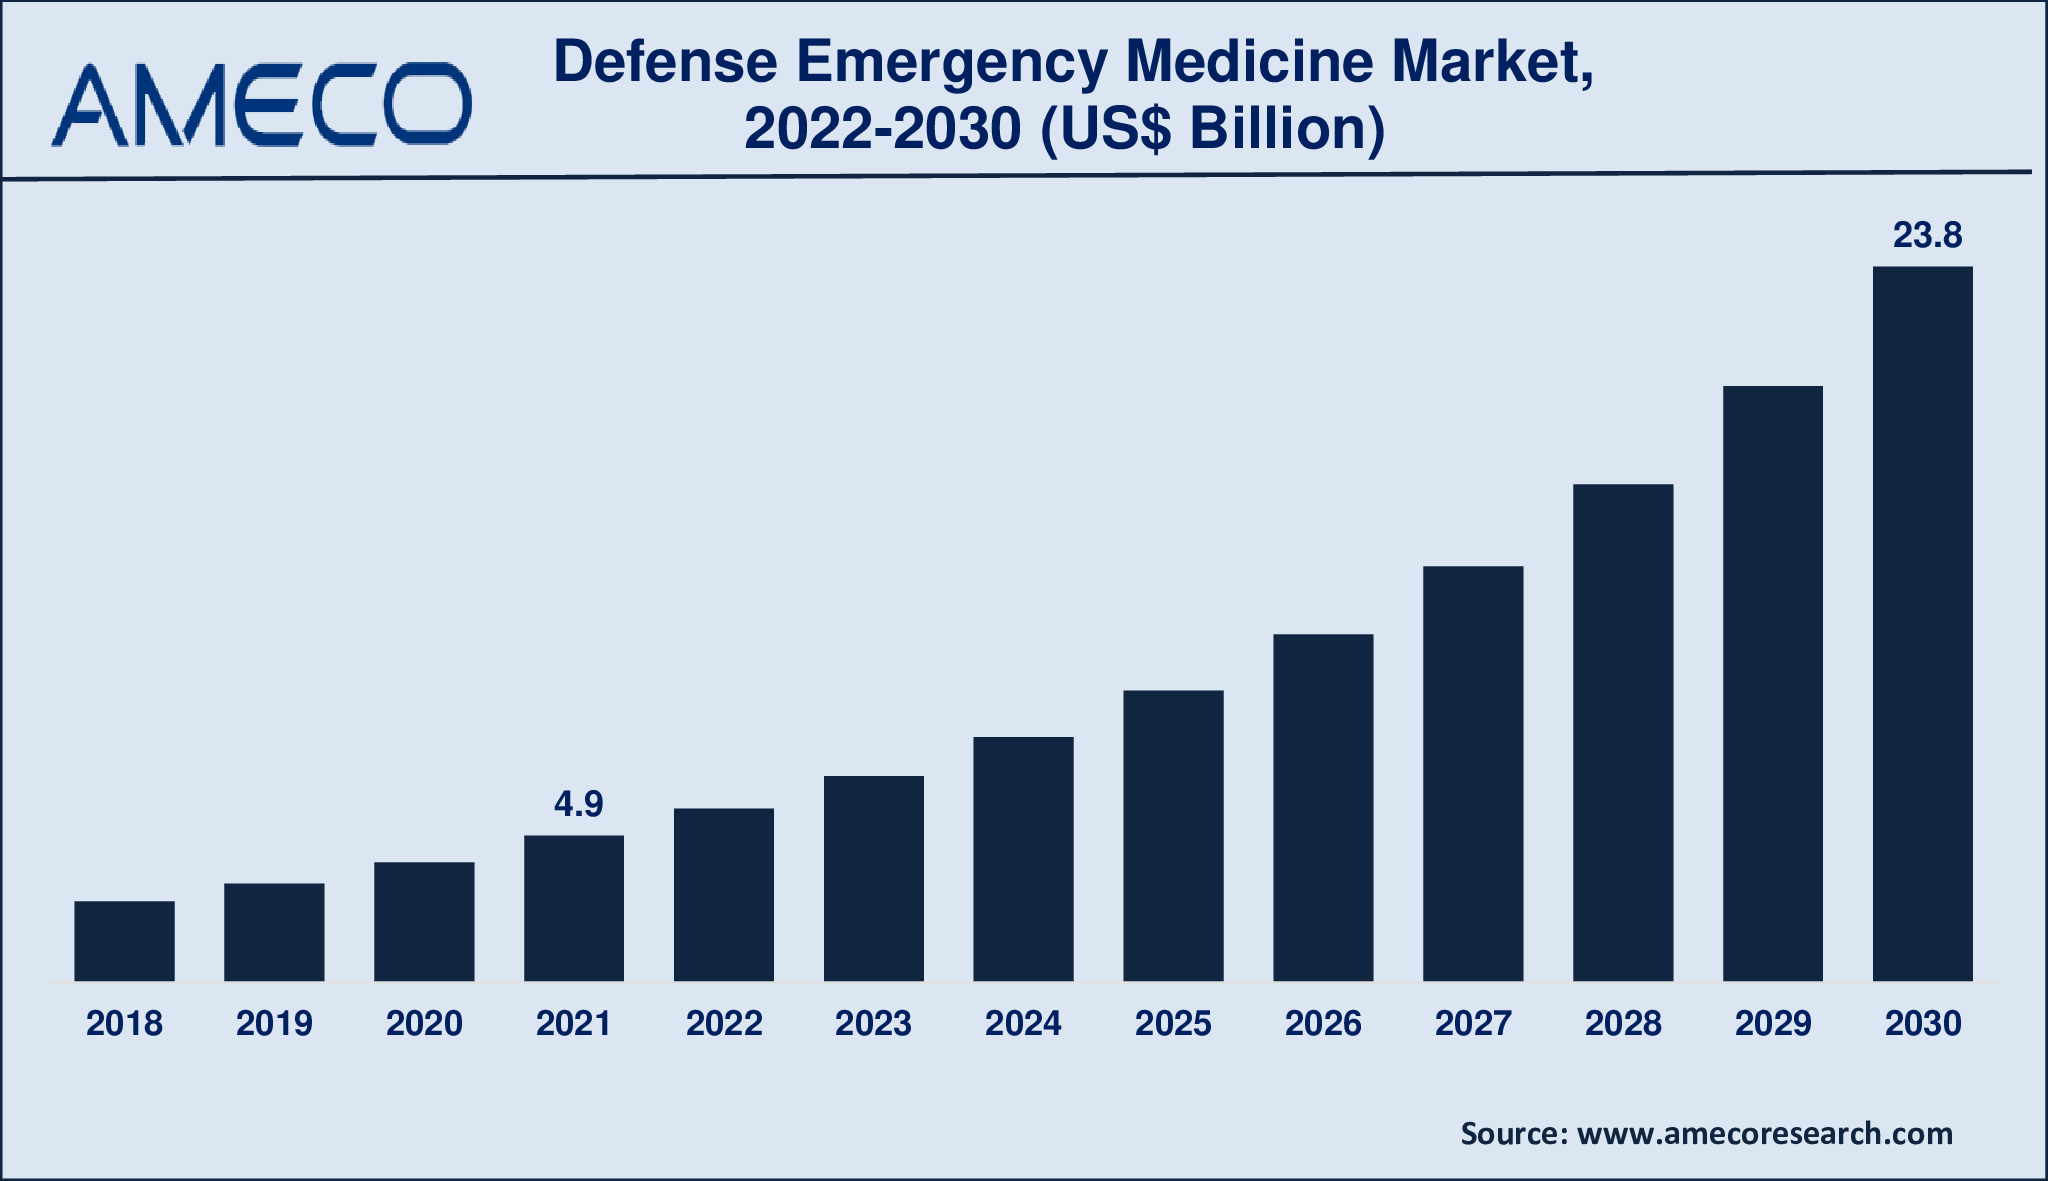 Defense Emergency Medicine Market Size, Share, Growth, Trends, and Forecast 2022-2030